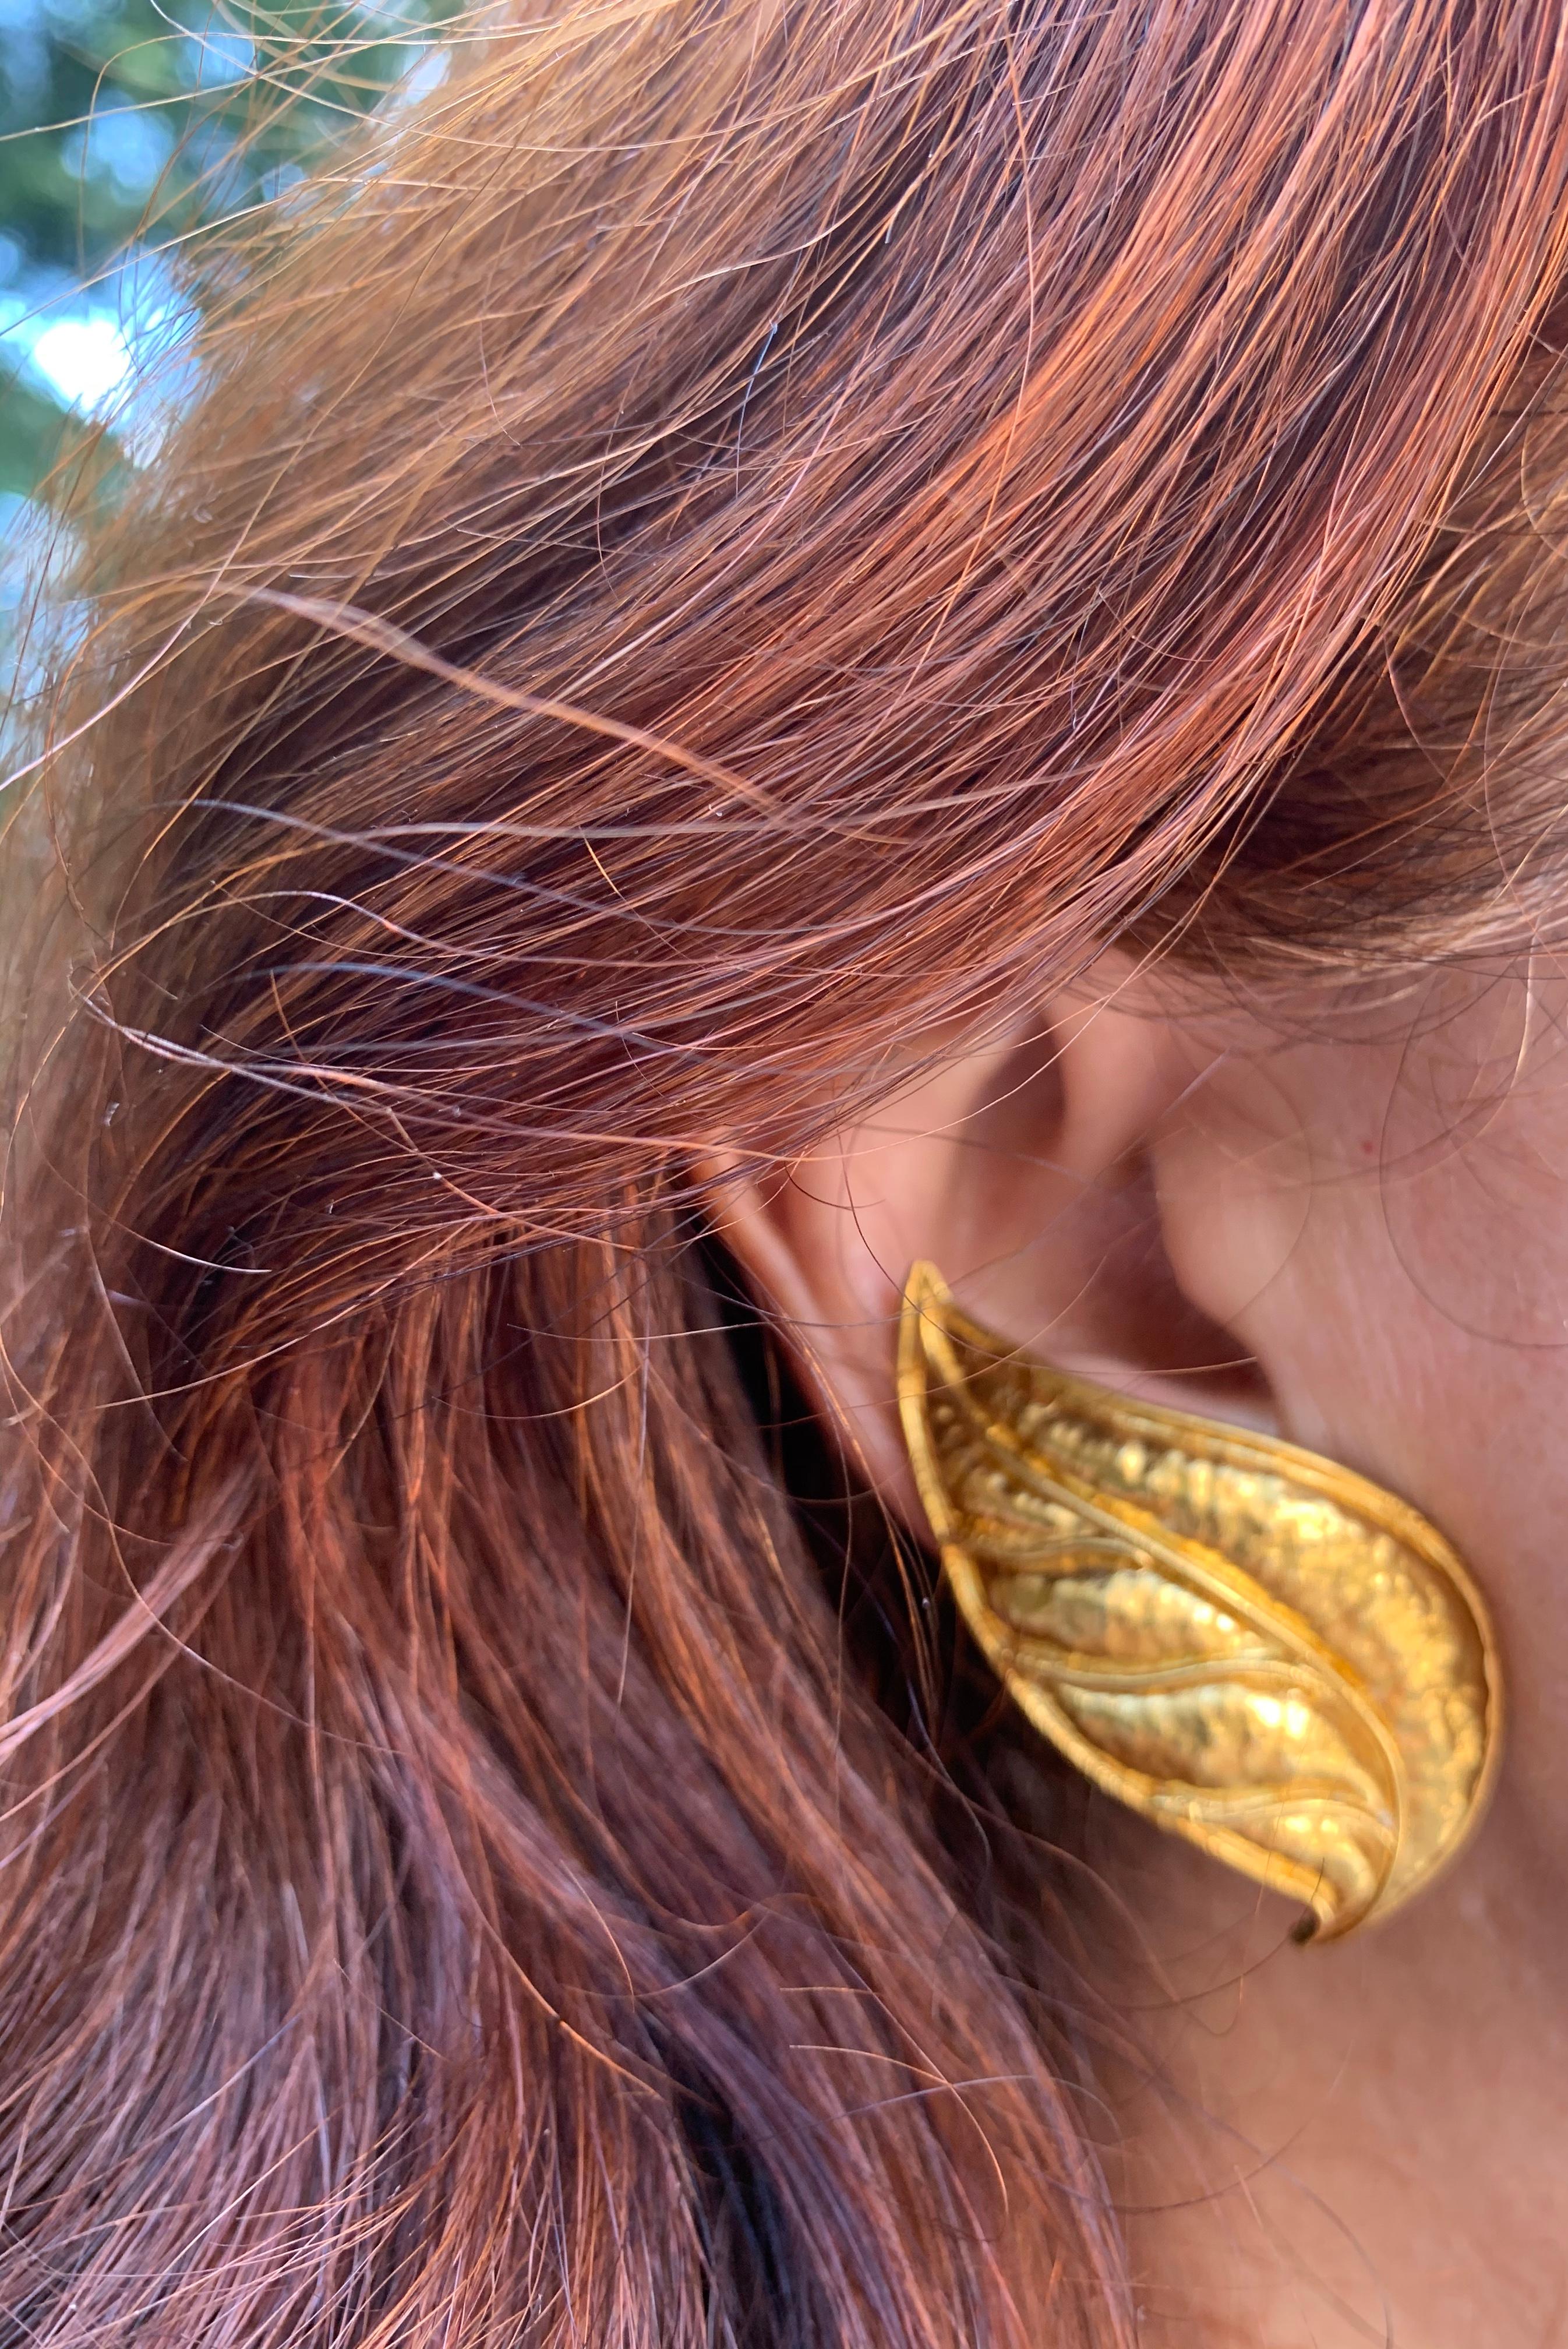 Very large, striking Archaeological Revival style 18k heavy hand hammered yellow gold Laurel Leaf earrings. Beautifully crafted with artful attention to detail and designed to be worn to complement the curved line of the ear. Classically glamourous